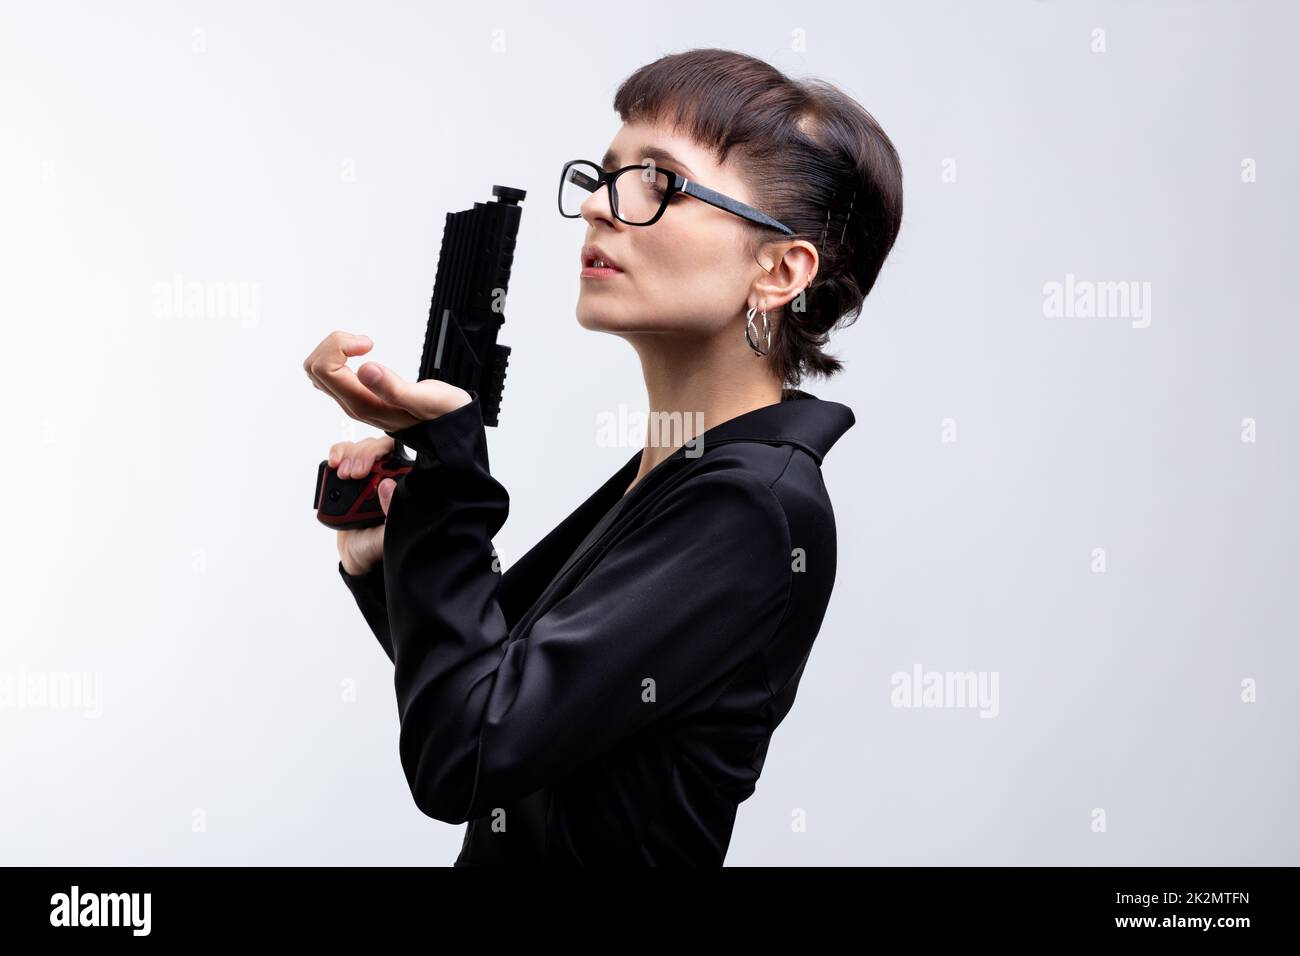 Attractive woman with handgun and copy space Stock Photo